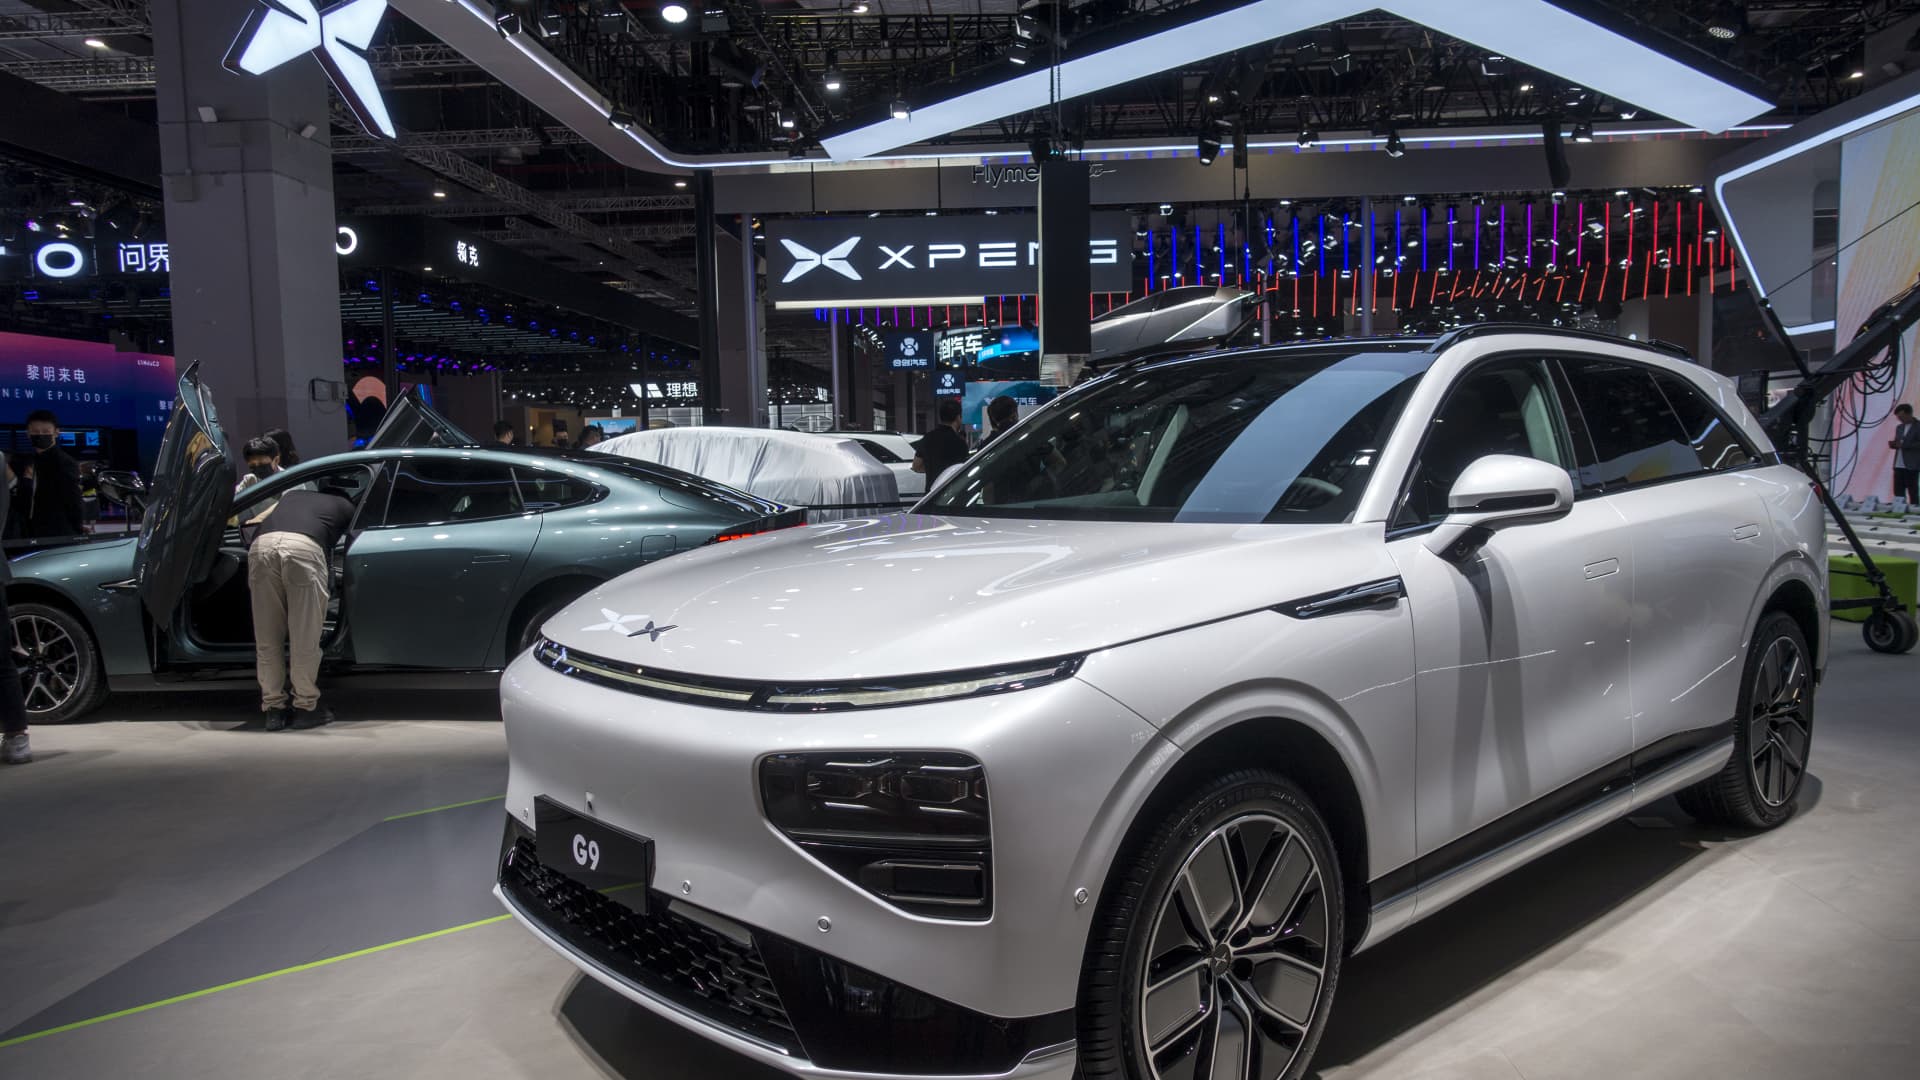 Xpeng plans to hire 4,000 people, invest in AI as CEO warns intense EV rivalry may end in 'bloodbath'